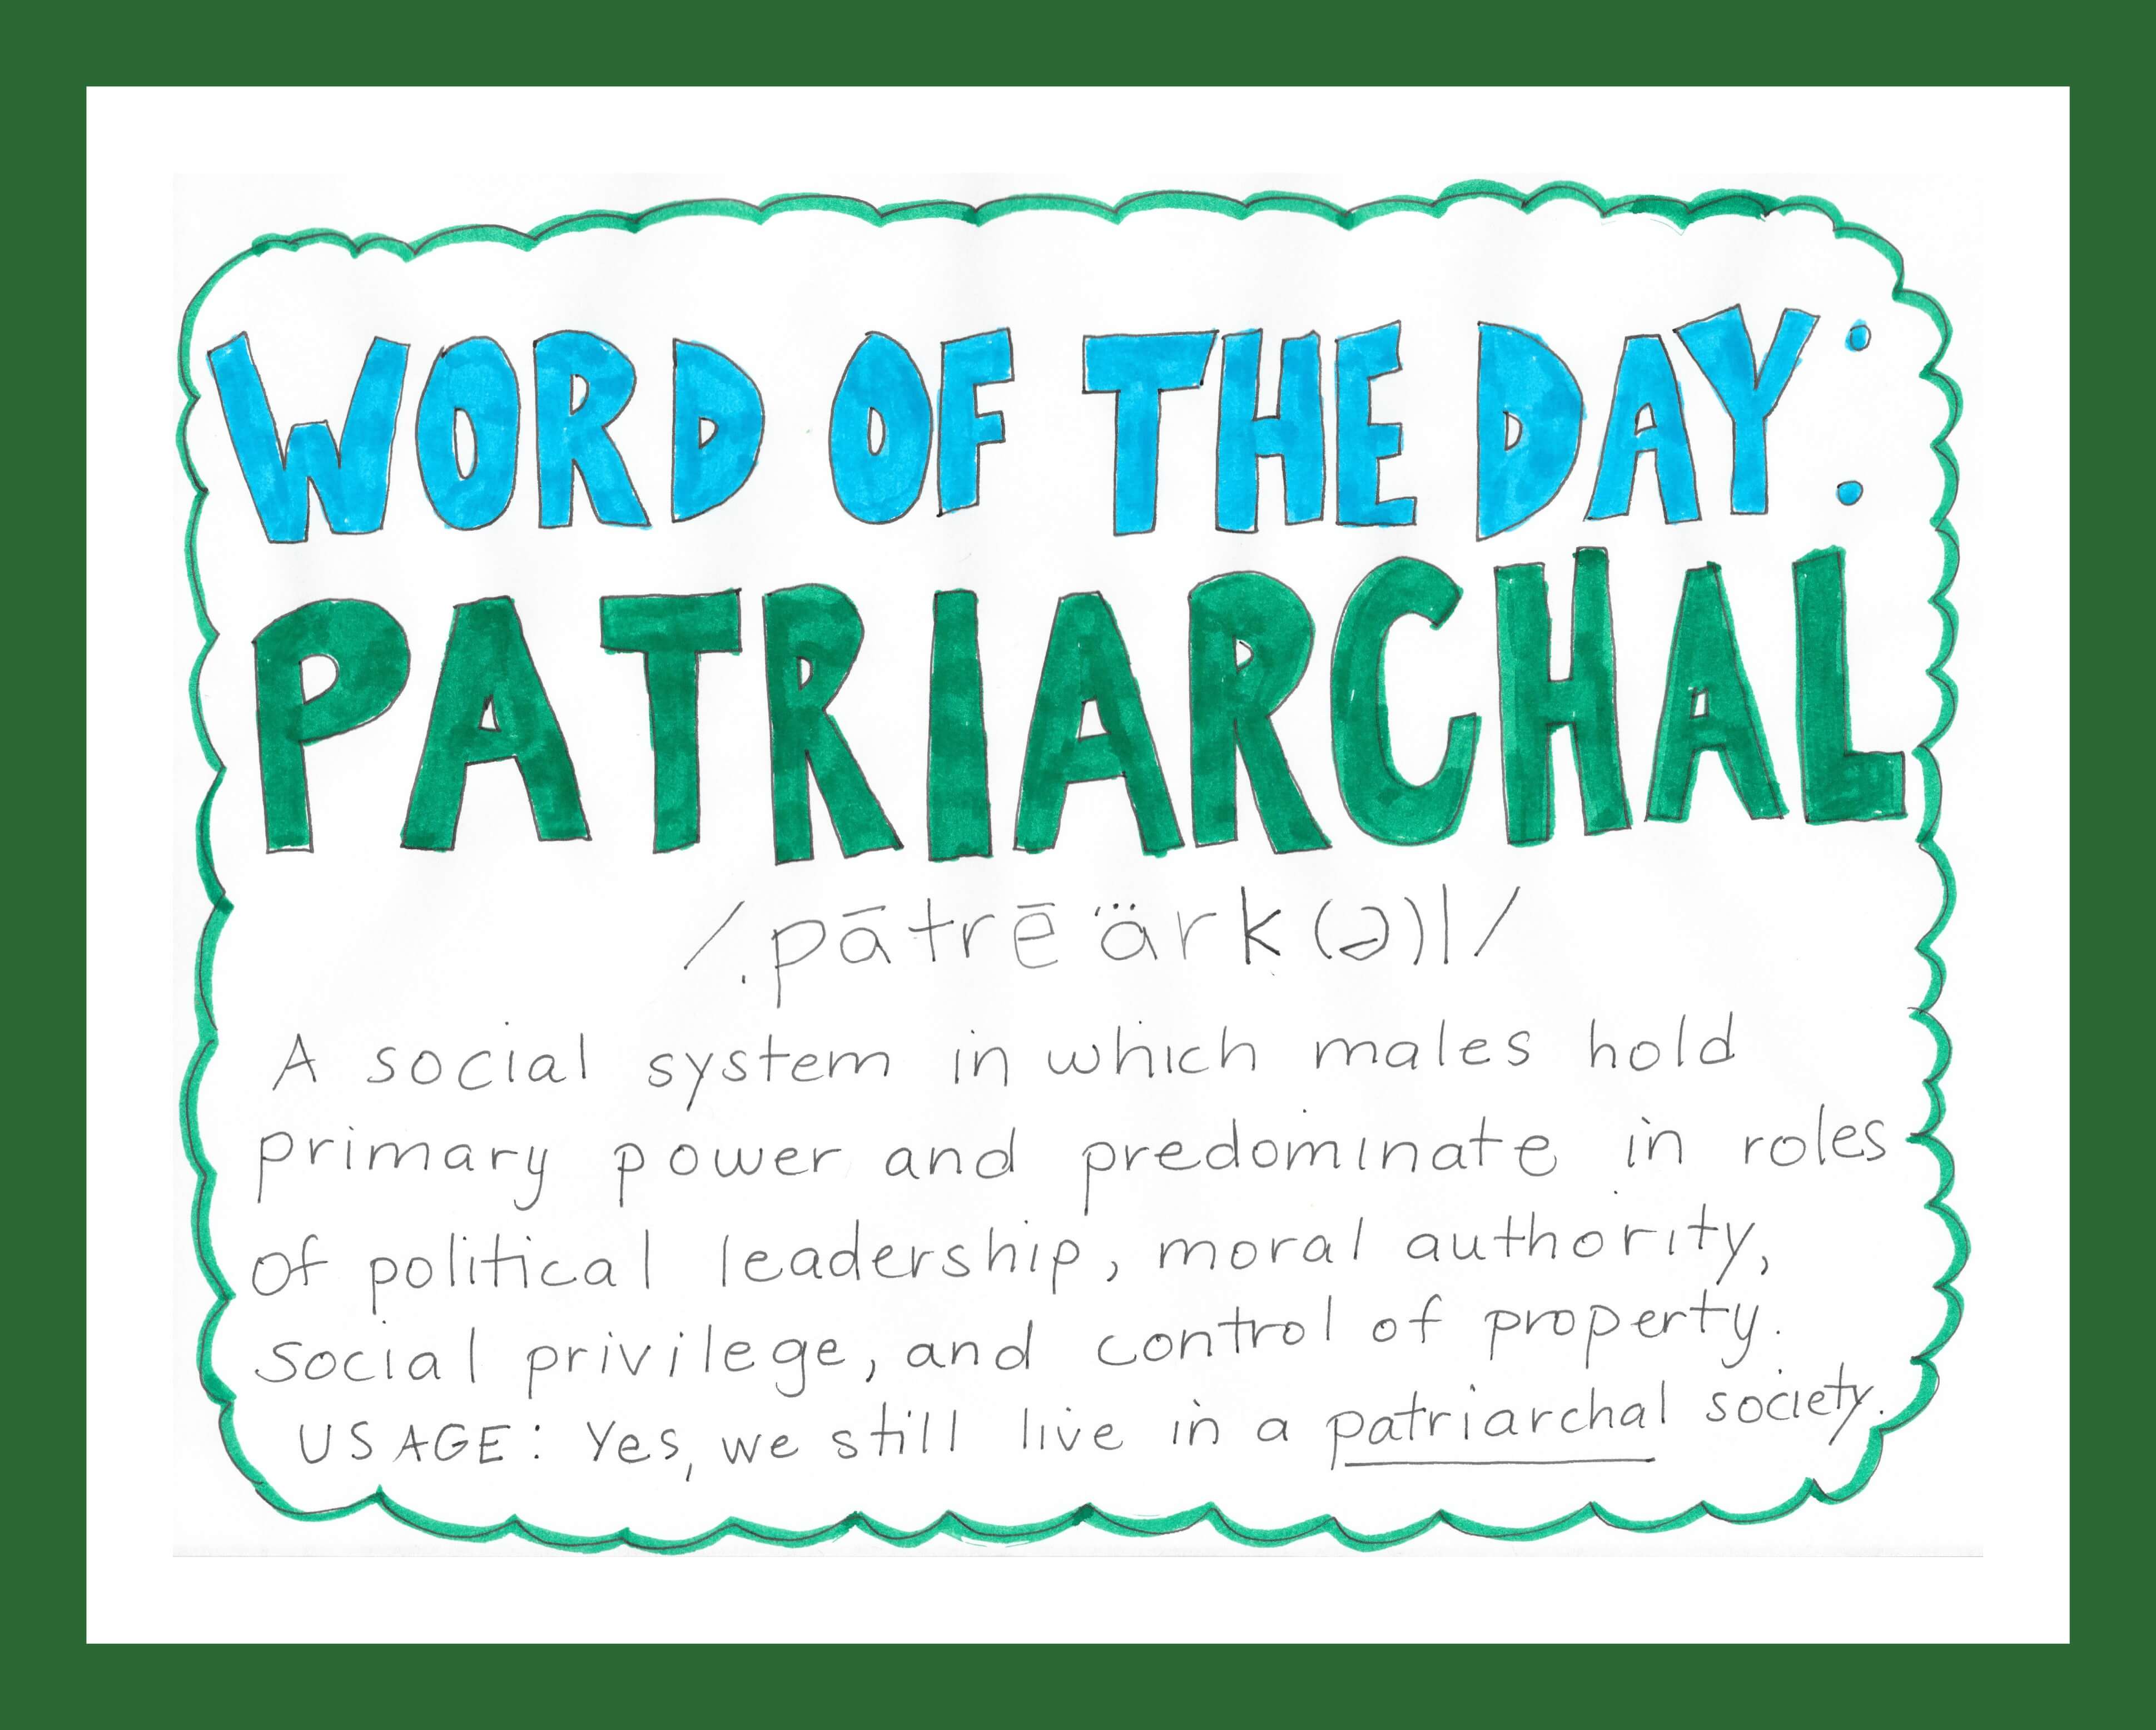 Word of the Day: Patriarchal